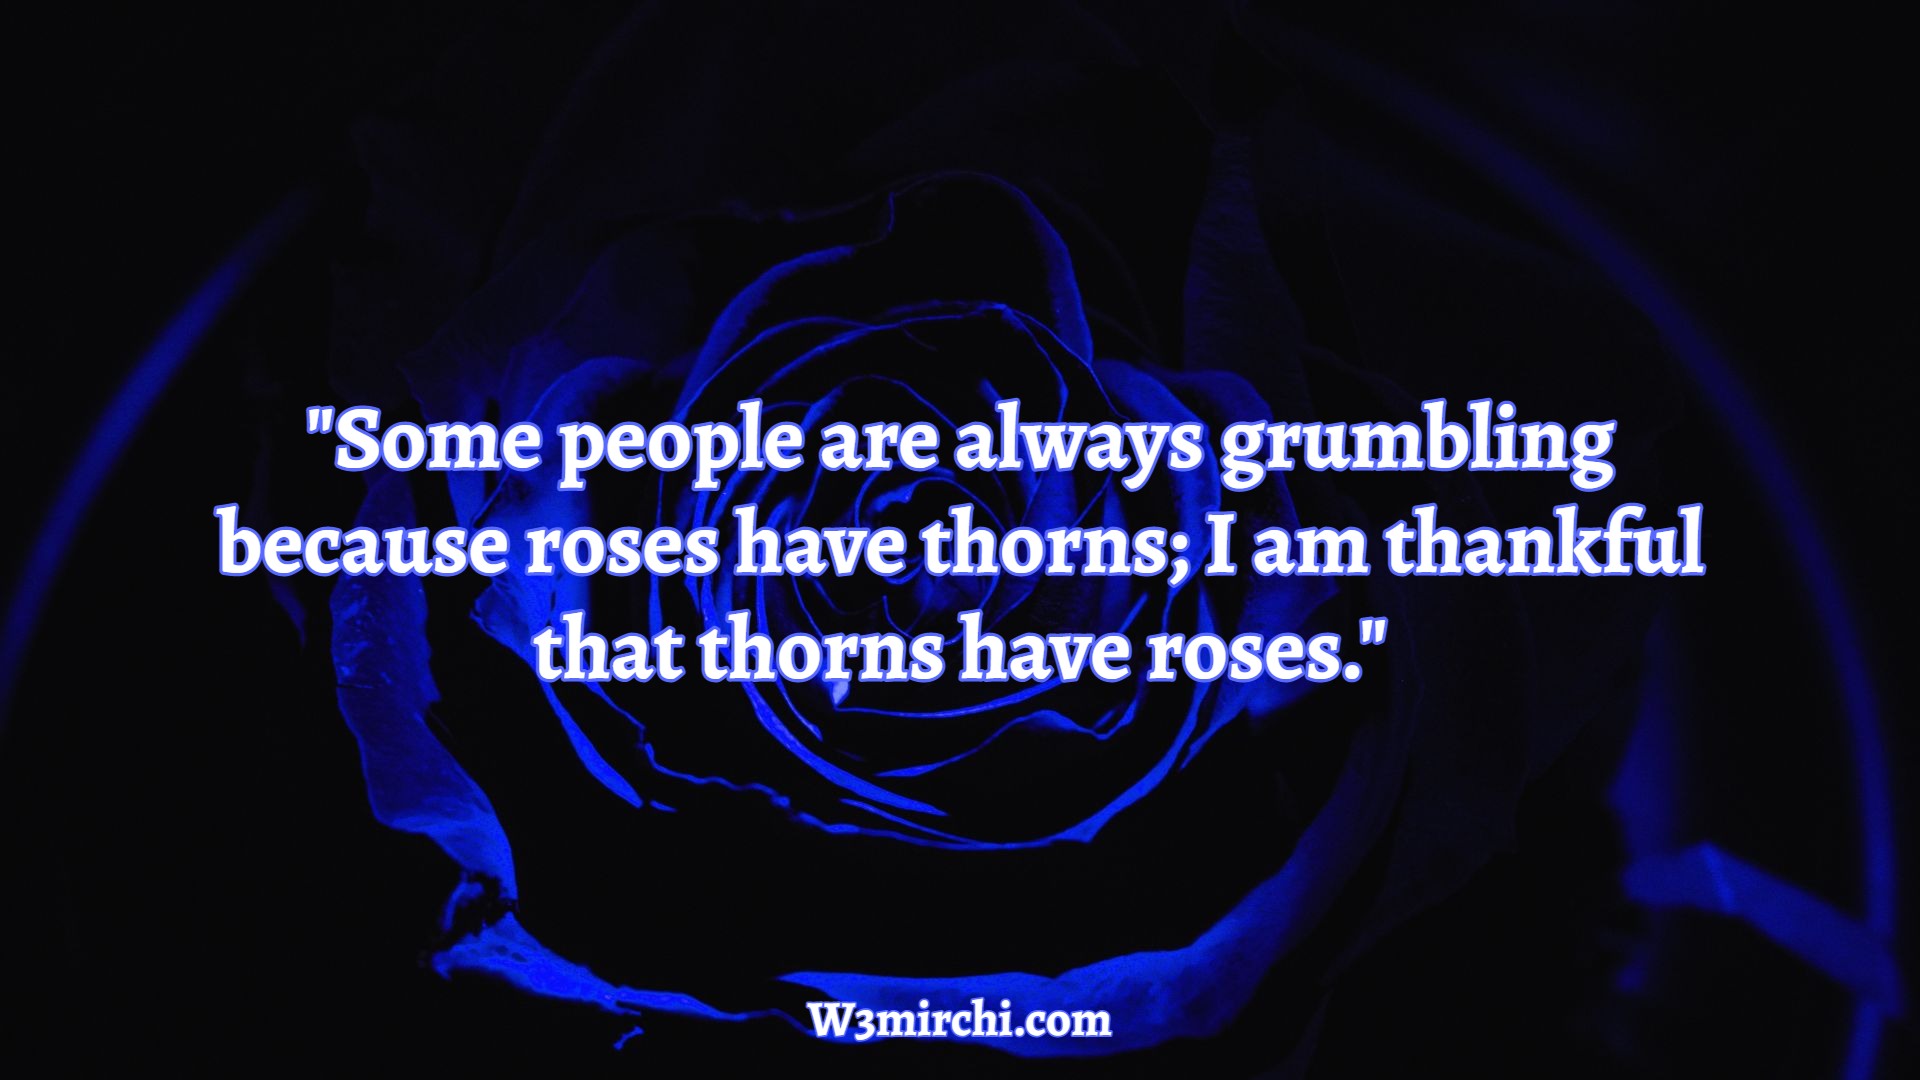 "Some people are always grumbling because